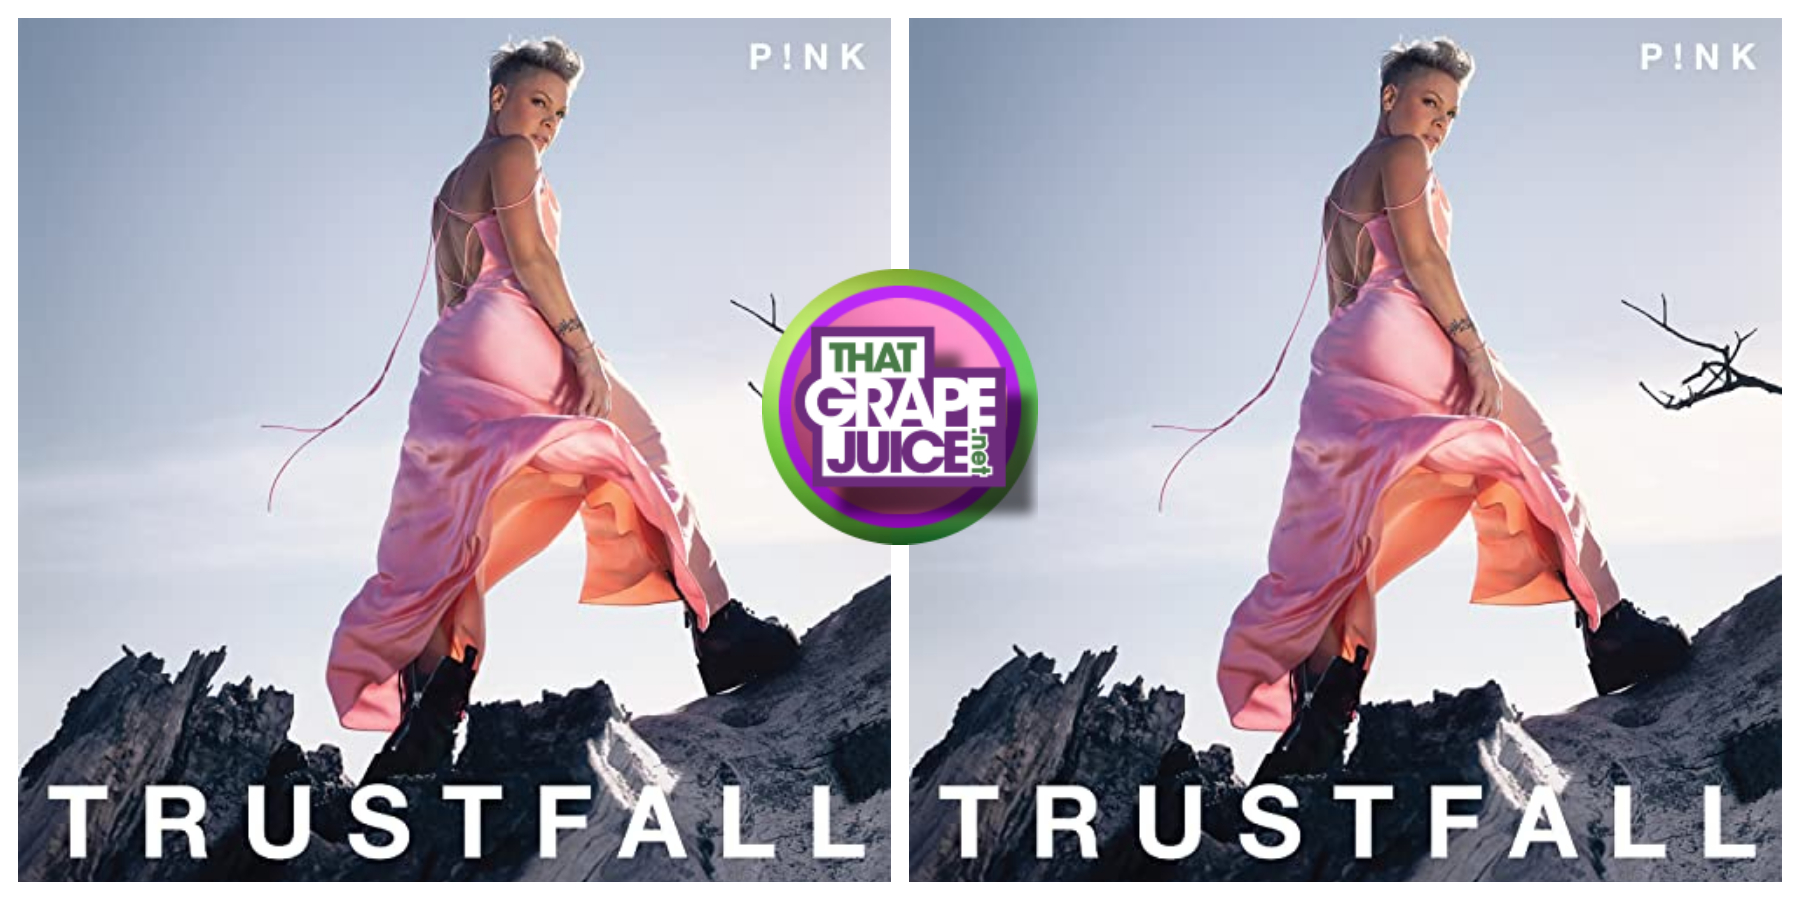 Predictions [Billboard 200]: P!nk’s ‘Trustfall’ Set To Be Her First Album to Miss #1 Since 2012